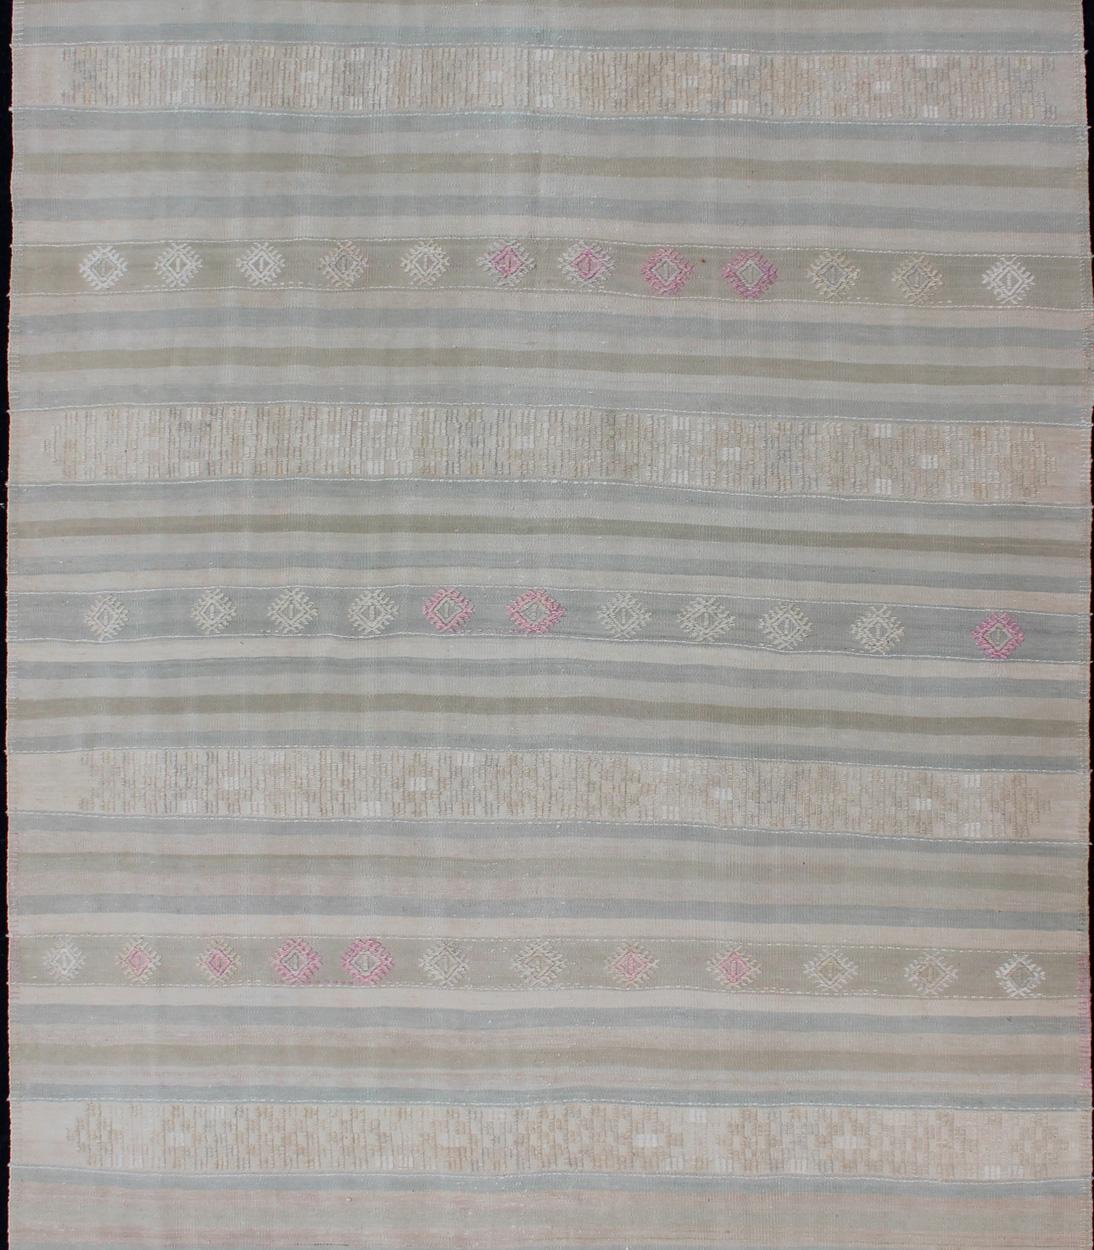 Vintage flat-weave Kilim with embroideries in blue and gray with a modern design
geometric stripe design Vintage Kilim from Turkey, Keivan Woven Arts / rug EN-179256, country of origin / type: Turkey / Kilim, circa 1960

This vintage Turkish